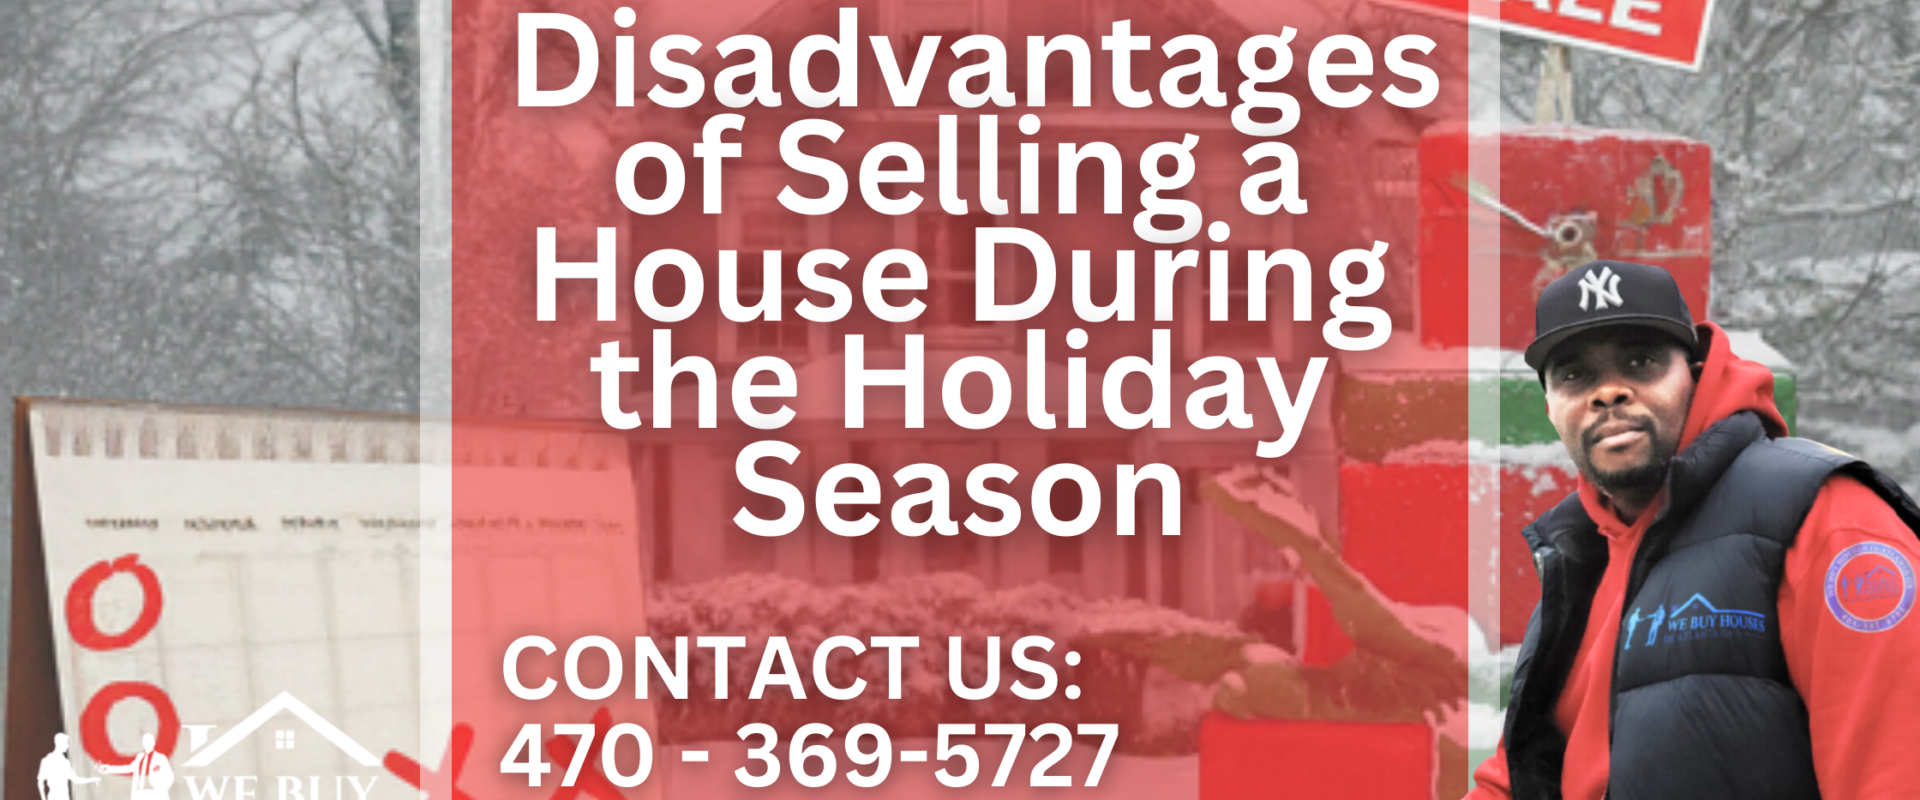 4 Disadvantages of Selling a House During the Holiday Season